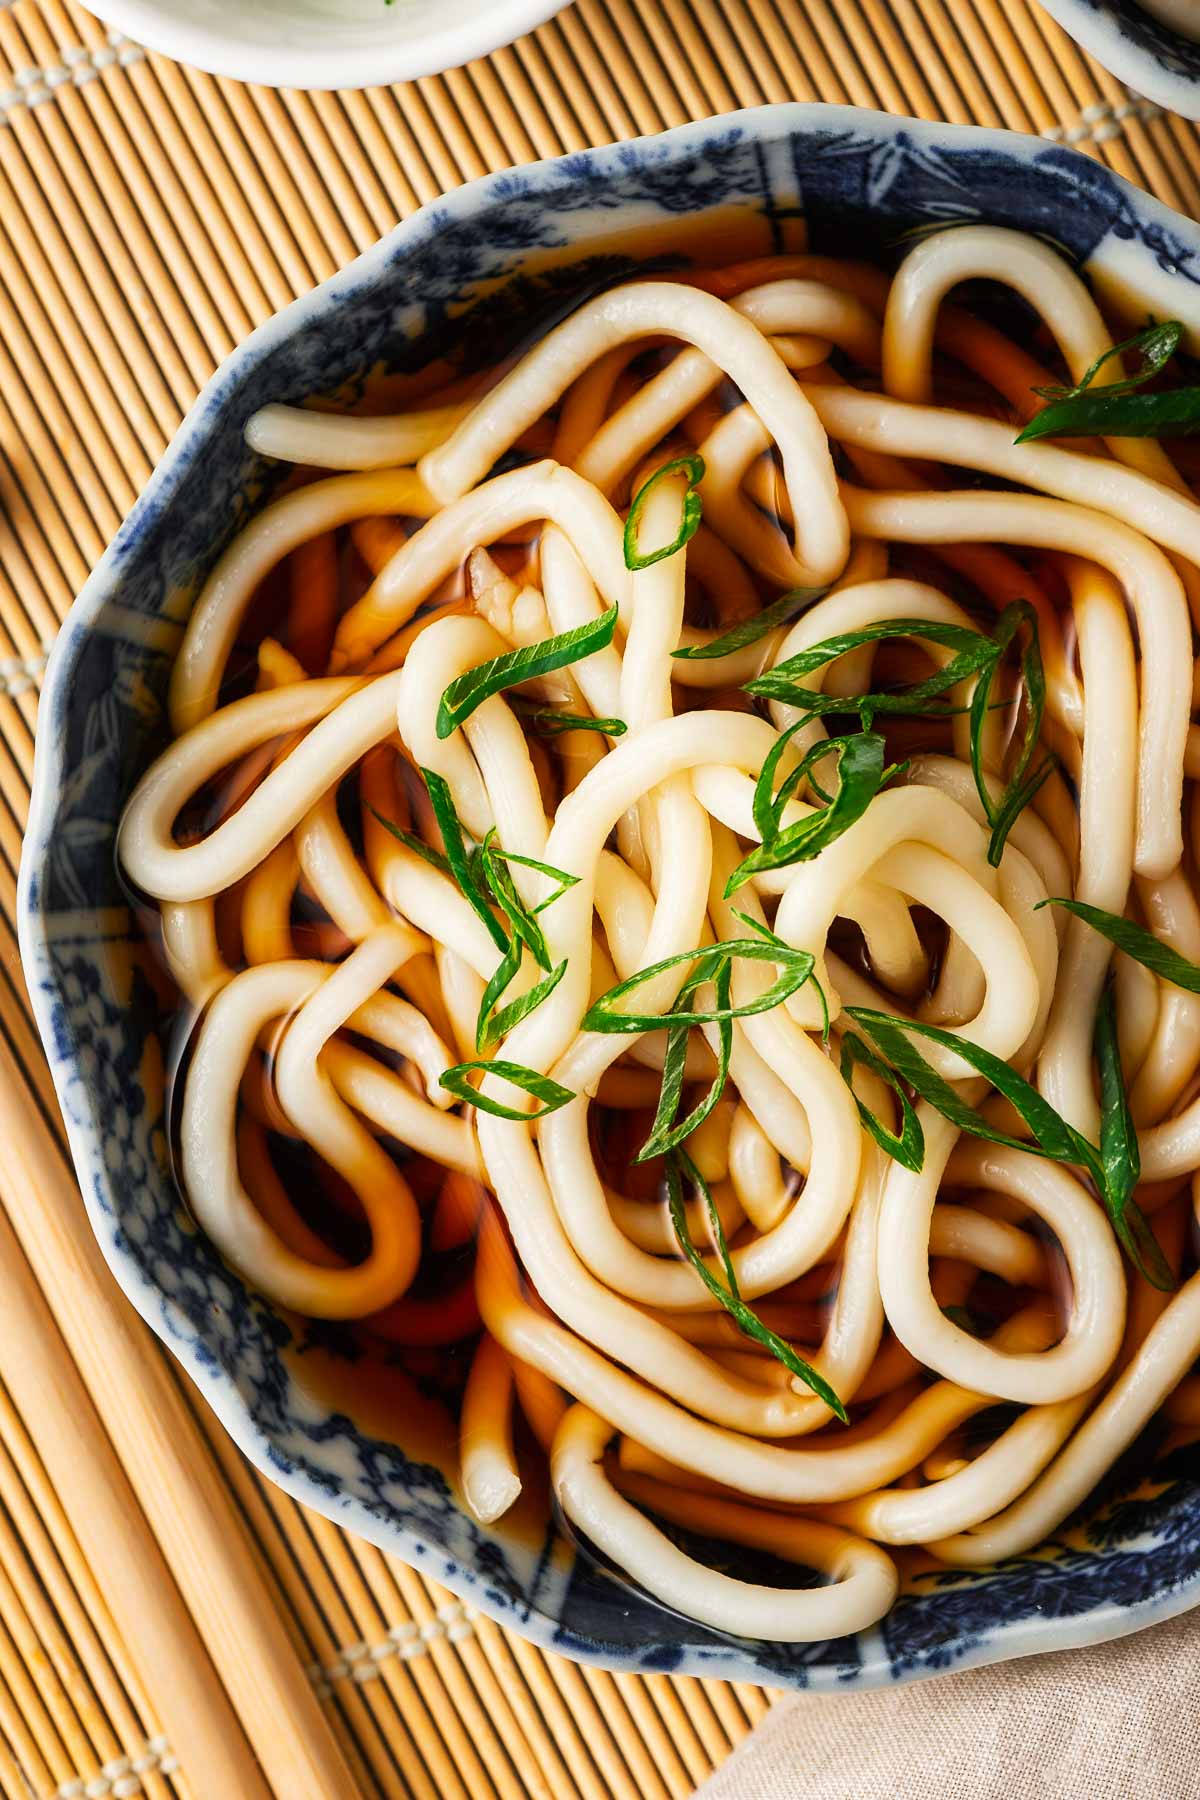 Thick and chewy udon noodles in a bowl of udon broth scattered with sliced green onions.